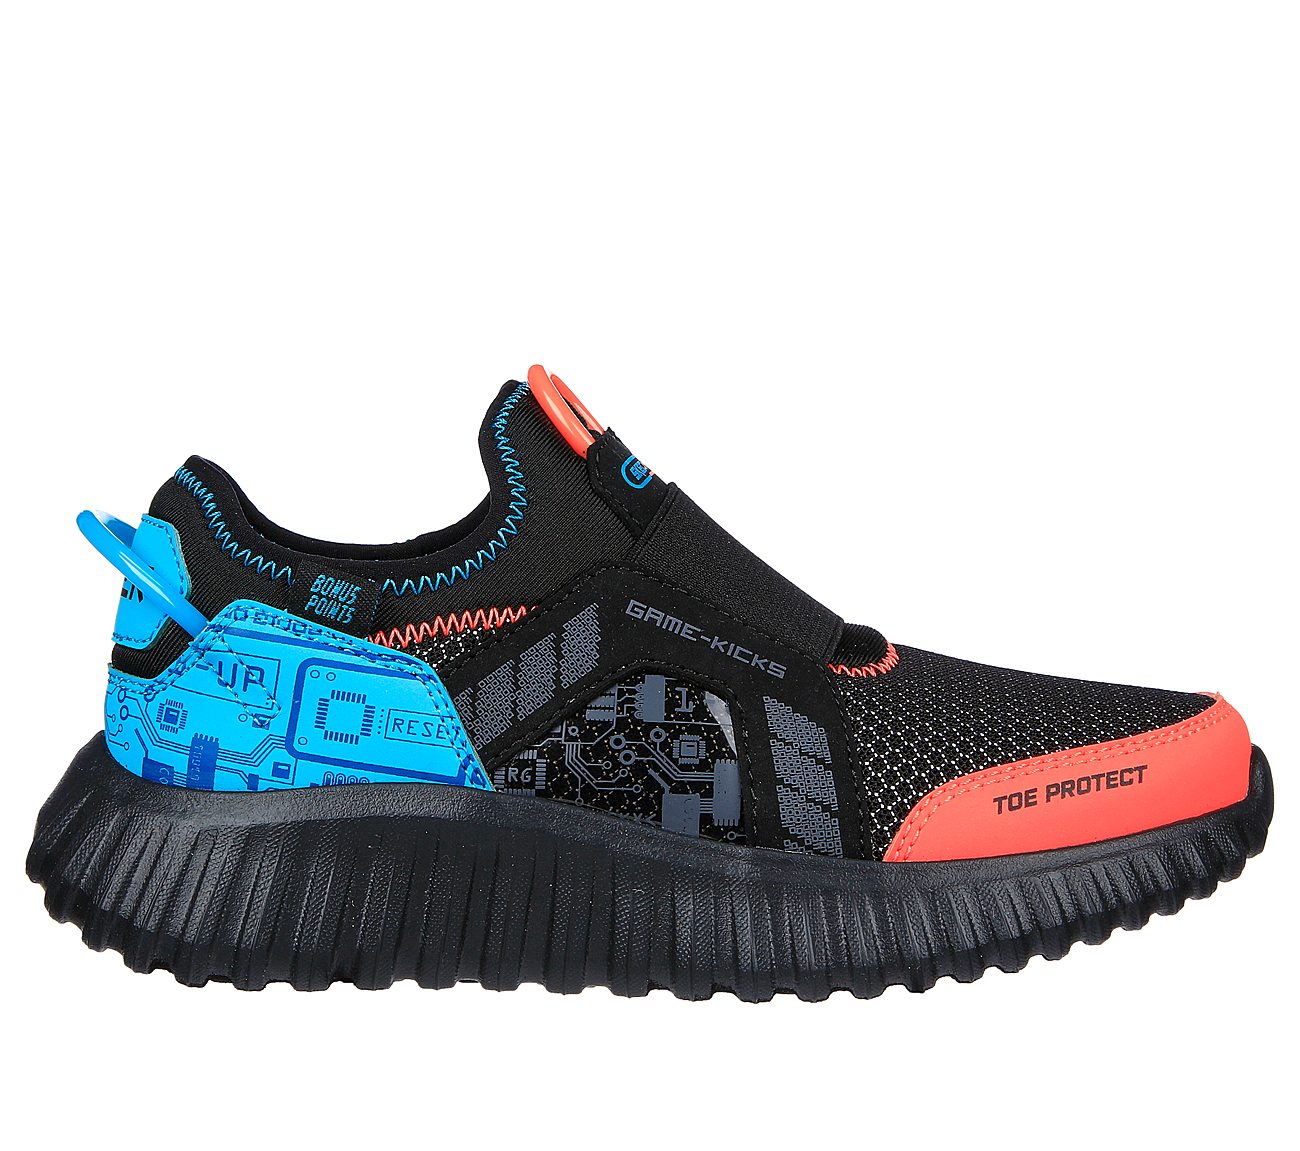 DEPTH CHARGE 2.0-DOUBLE POINT, BLACK/MULTI Footwear Lateral View